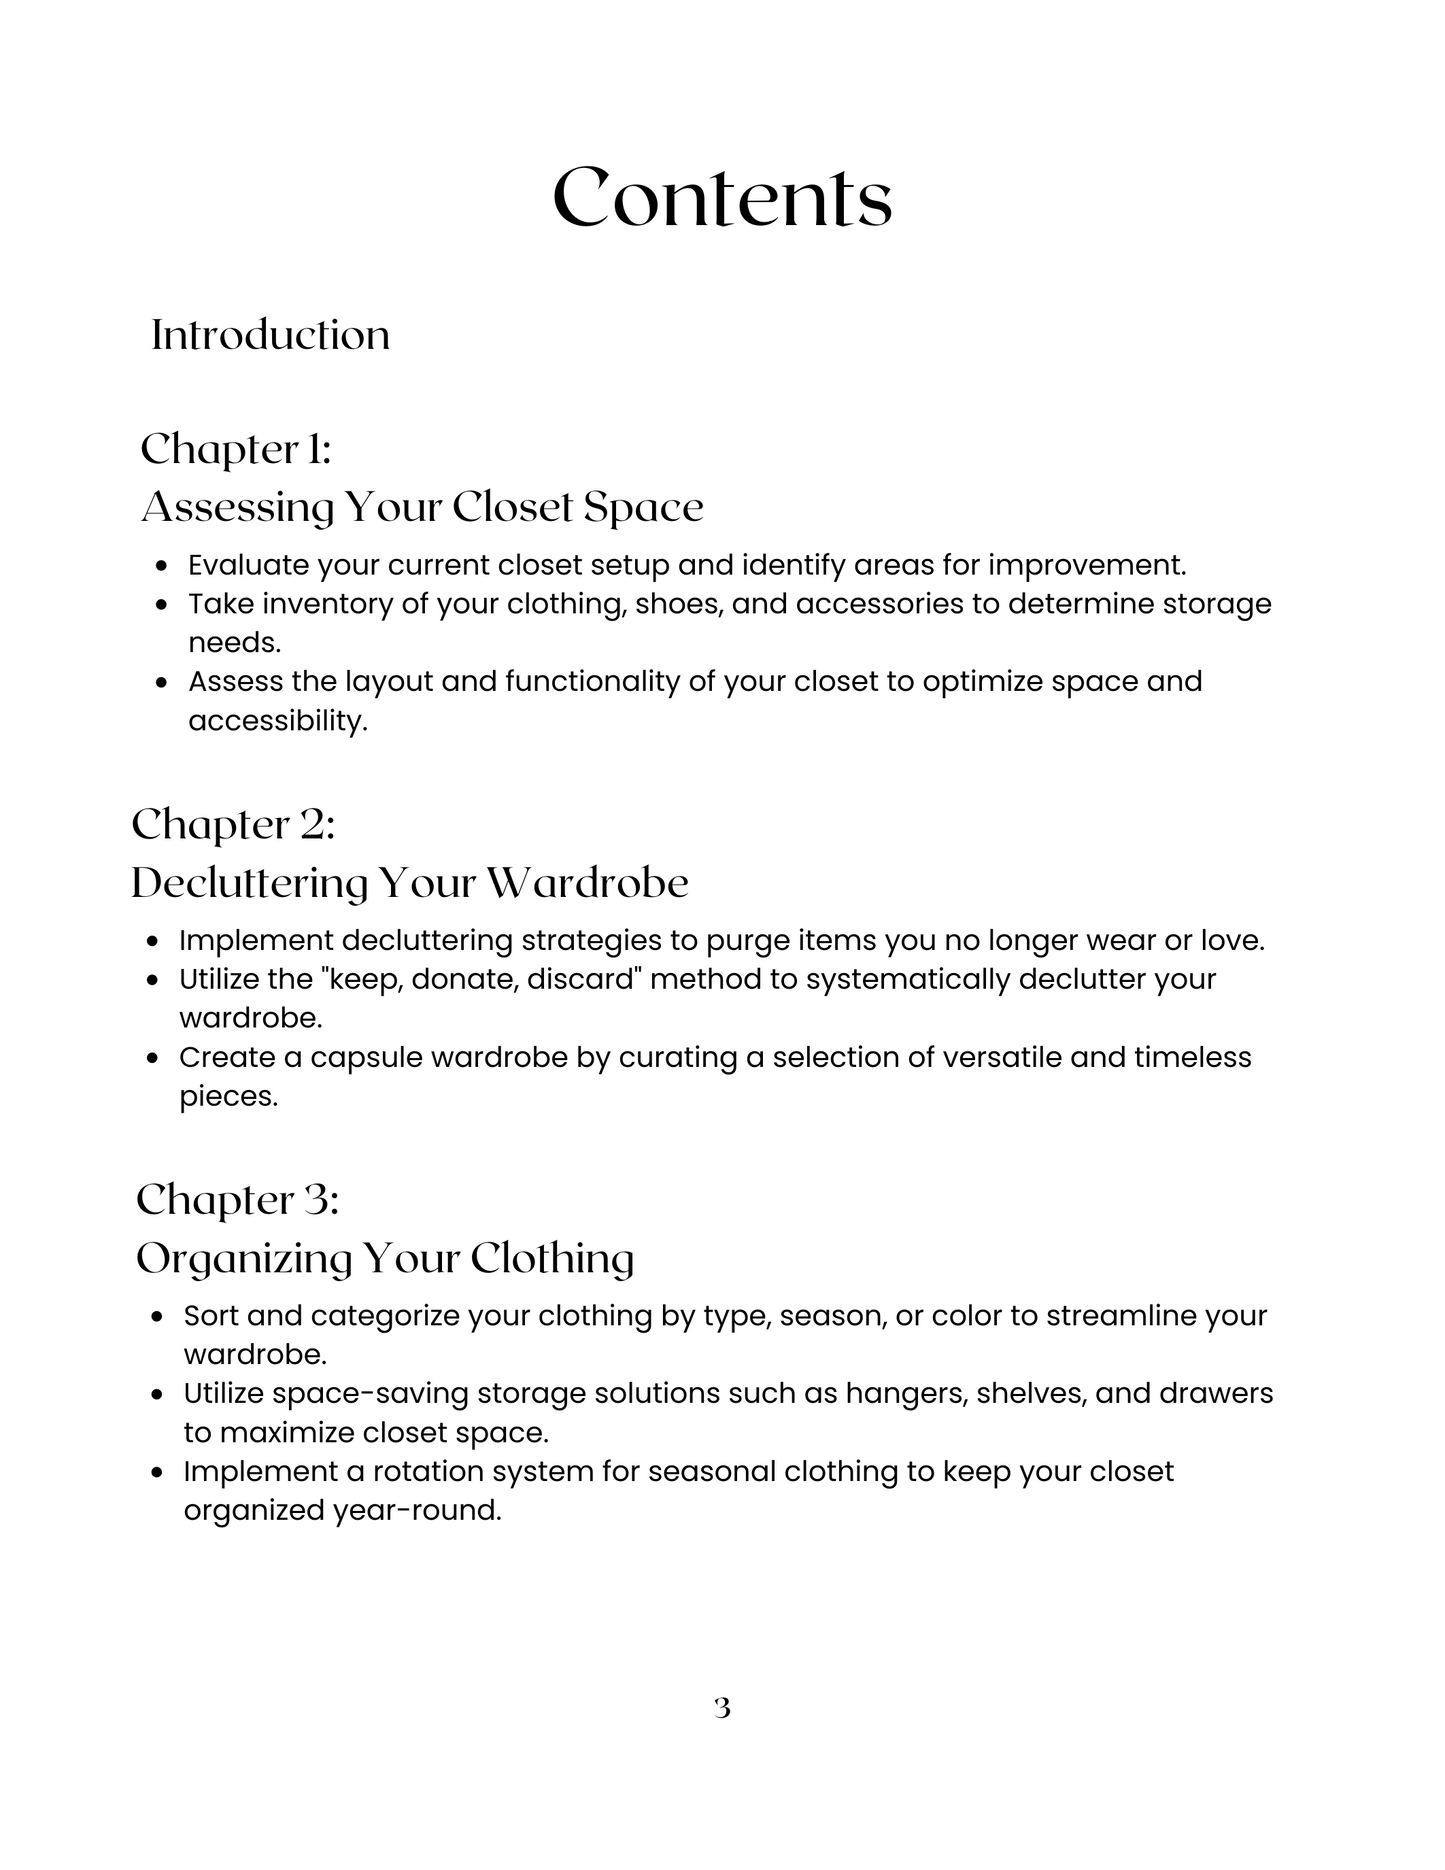 Contents for 'Closet Clarity: A Comprehensive Guide.' Declutter, organize, and style effortlessly. Say hello to closet confidence! Download now.